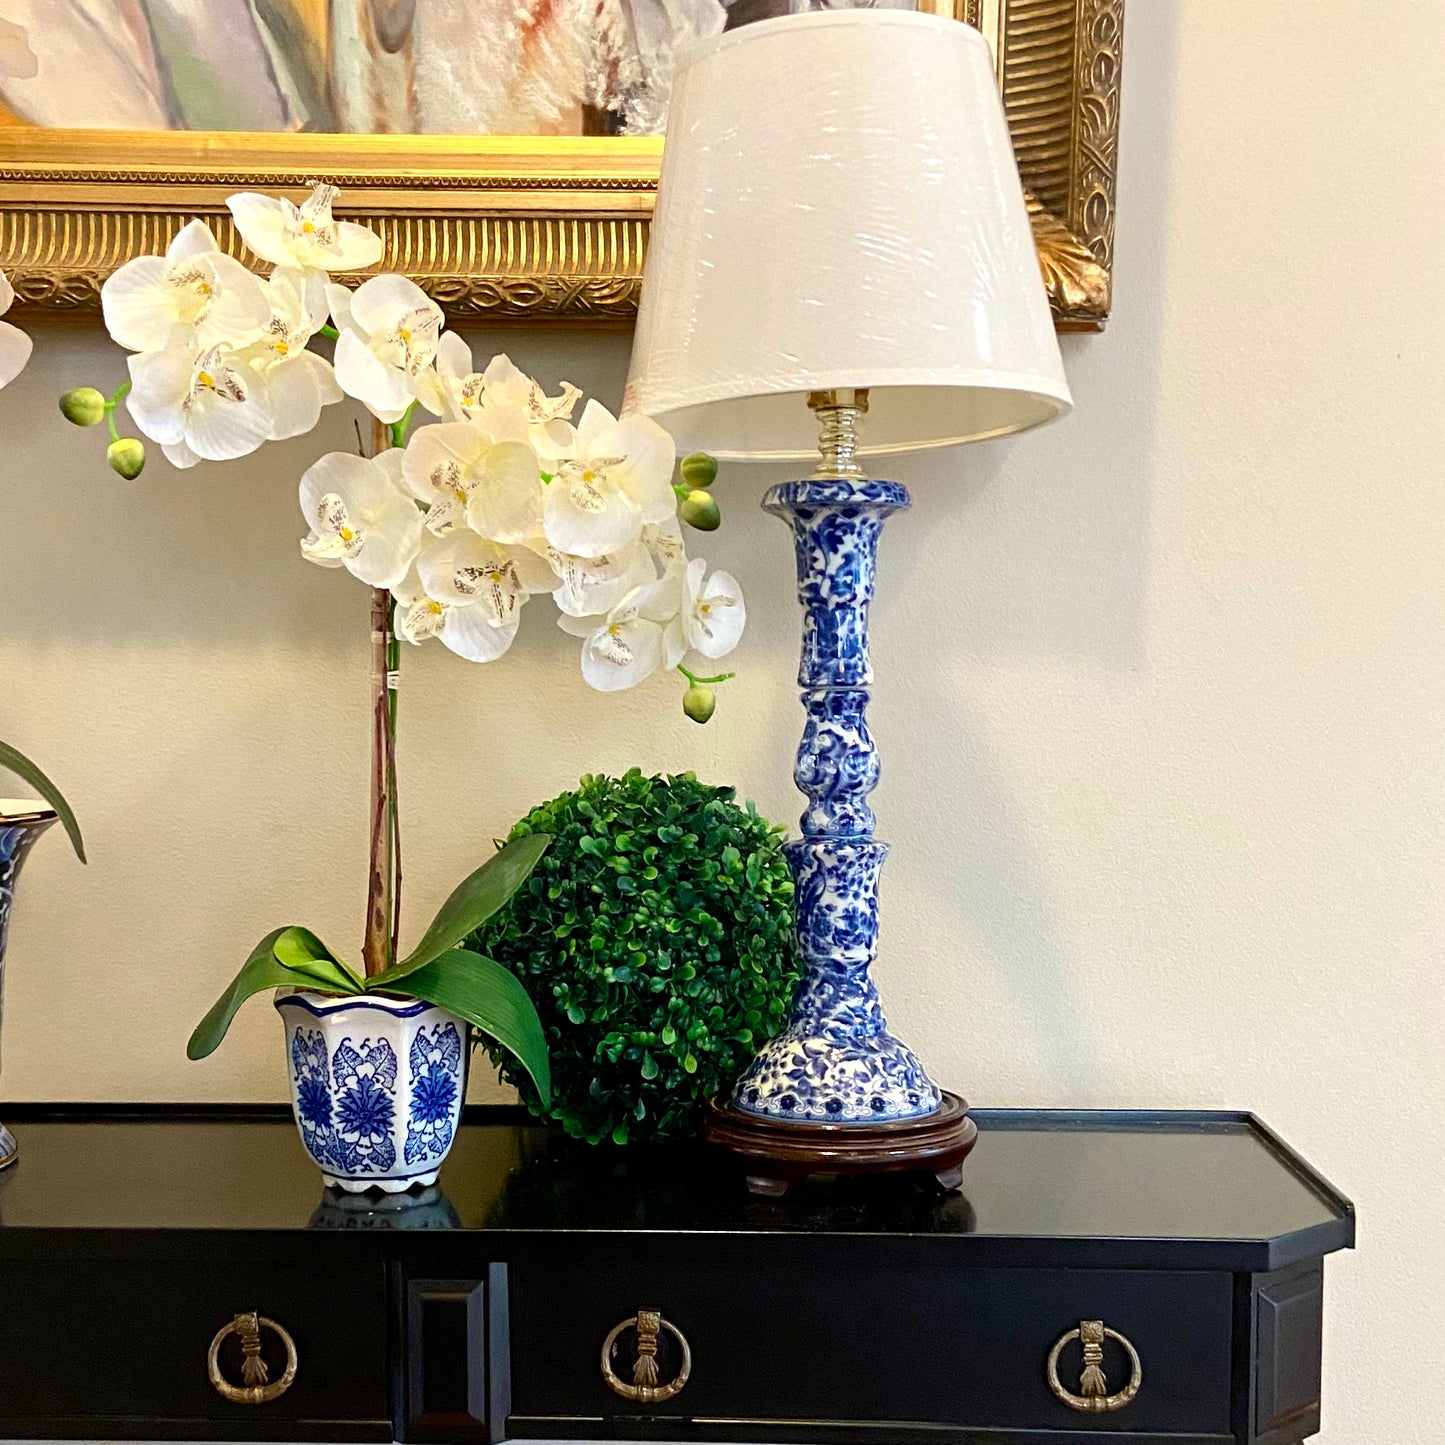 Vintage porcelain blue & white chinoiserie candlestick lamp.